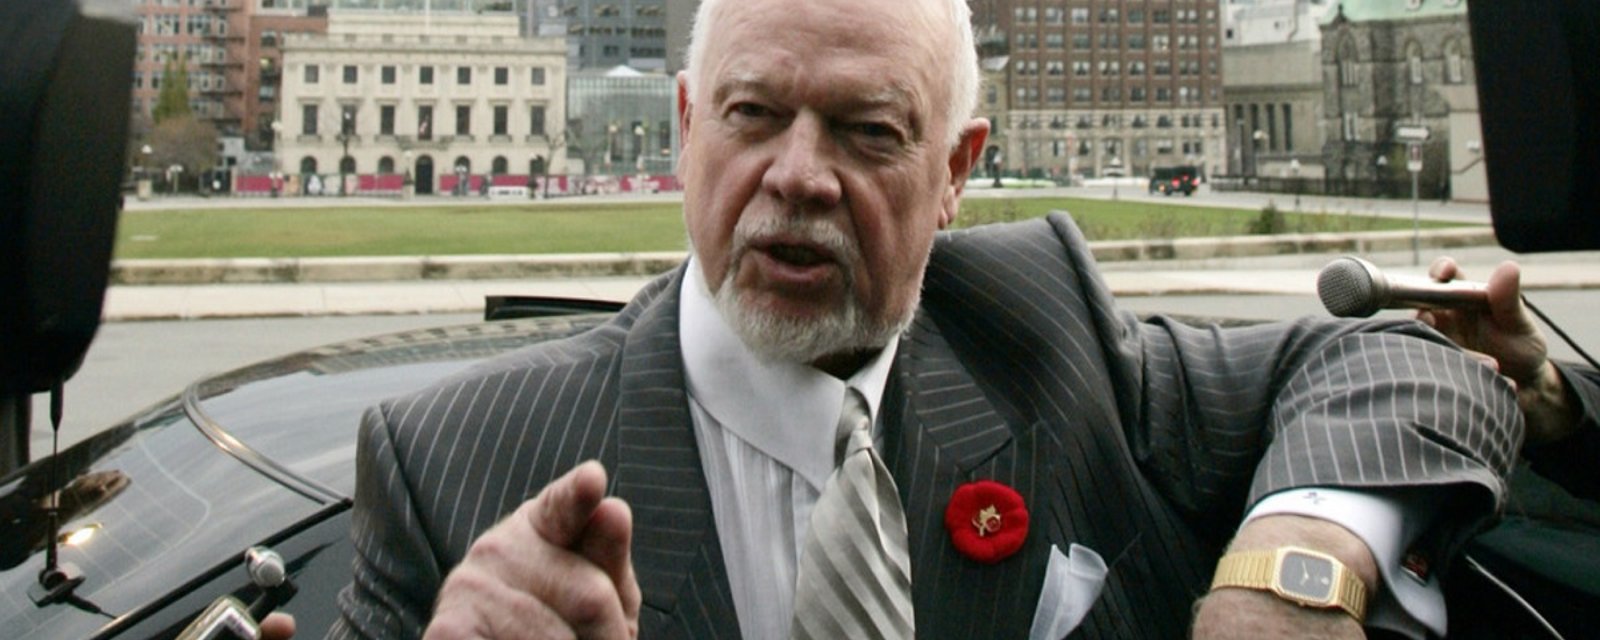 Don Cherry: “They played last night like they wanted the coach fired.”